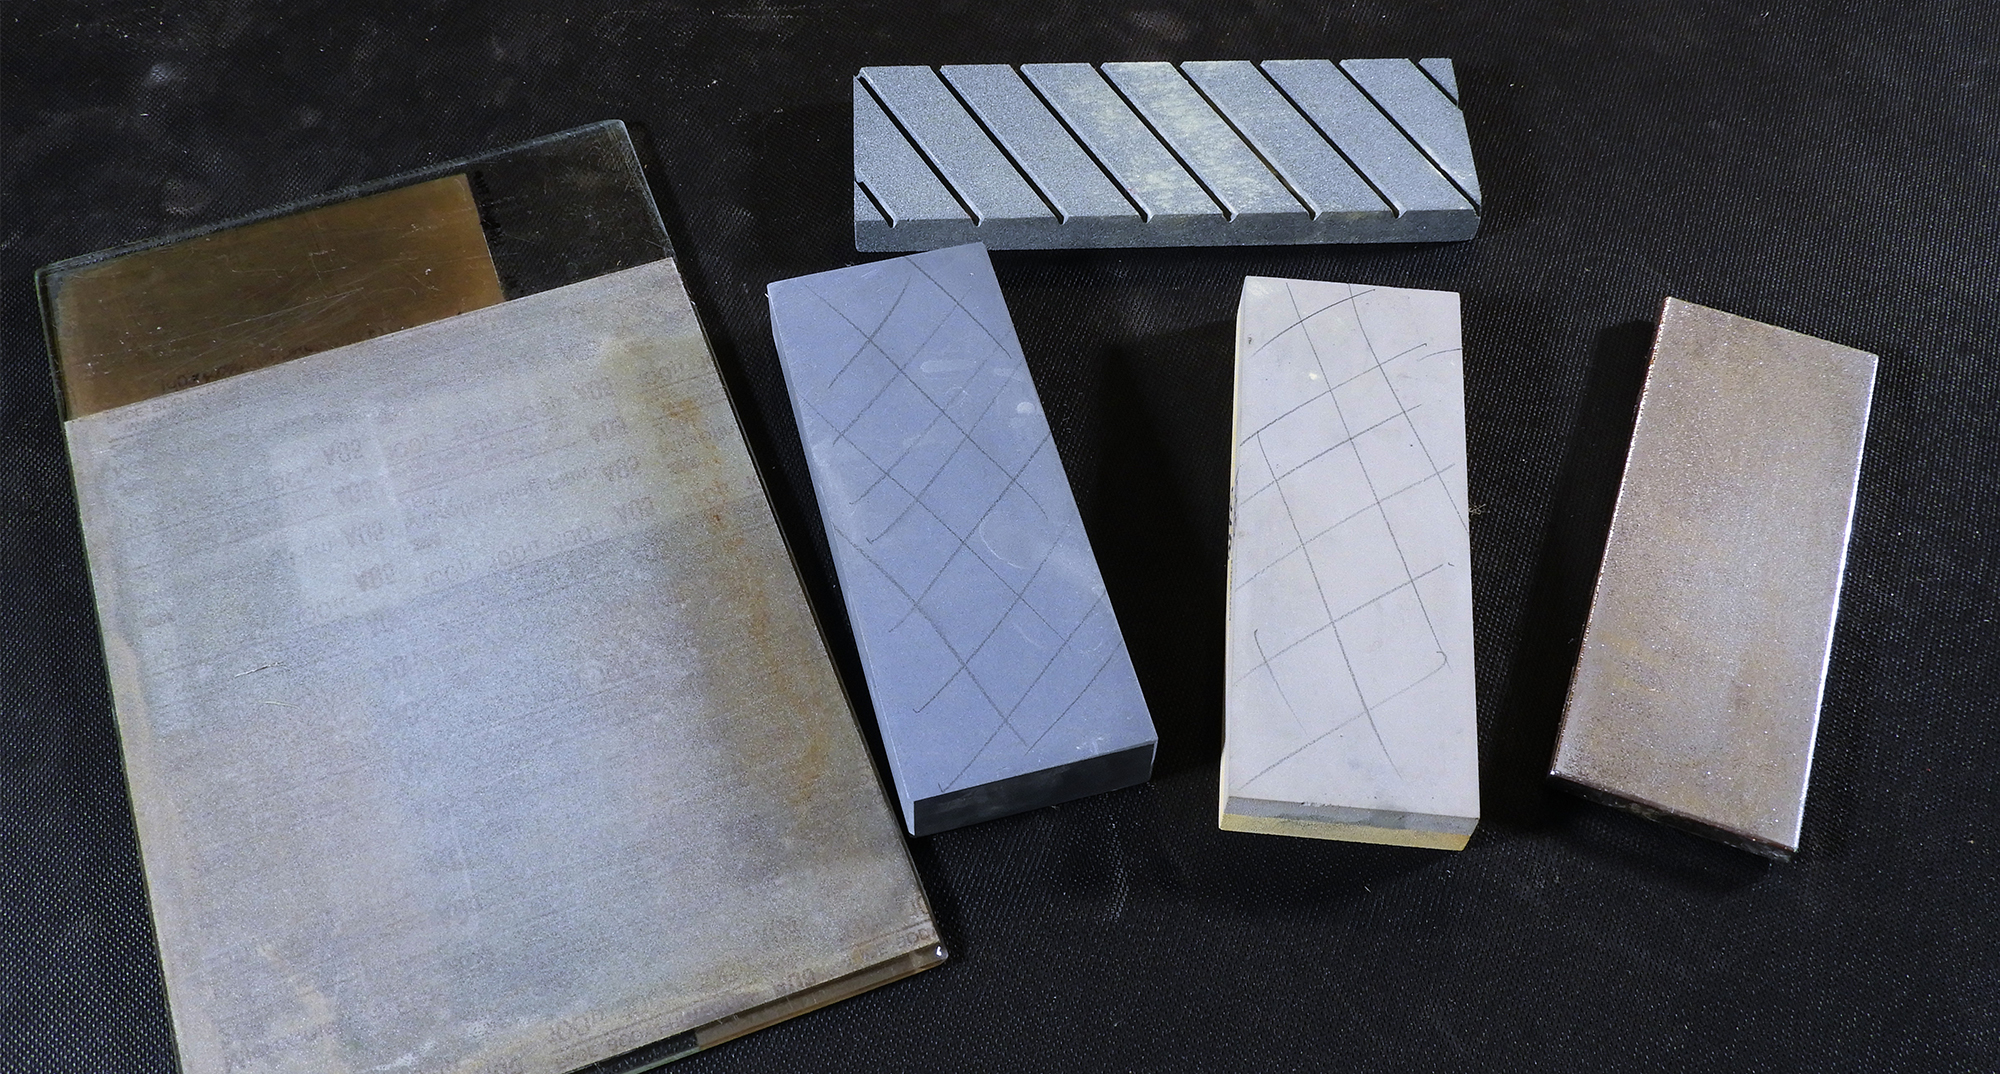 Selection of flattening media – Abrasive on glass (left), Truing stone (top) and diamond stone (right)